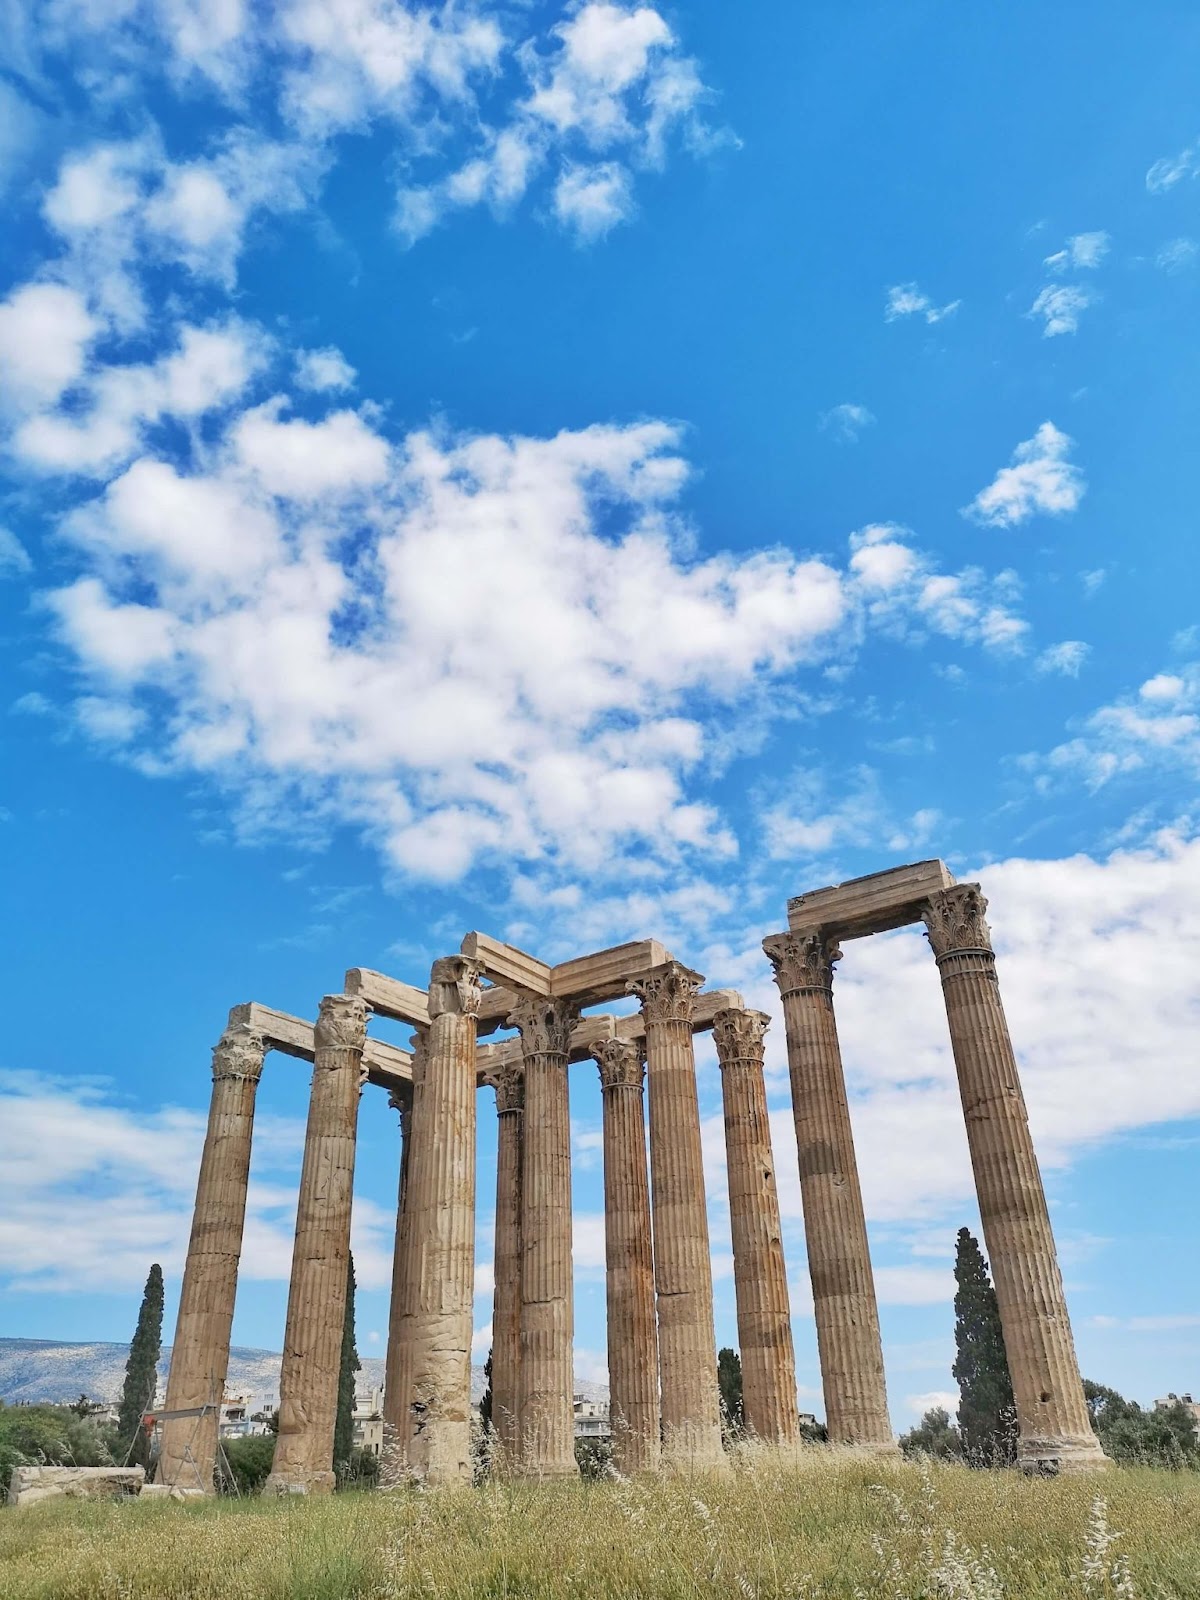 1 day in Athens, Temple of Olympian Zeus, Columns of the Olympian, temple dedicated to Zeus, Athens, Greece